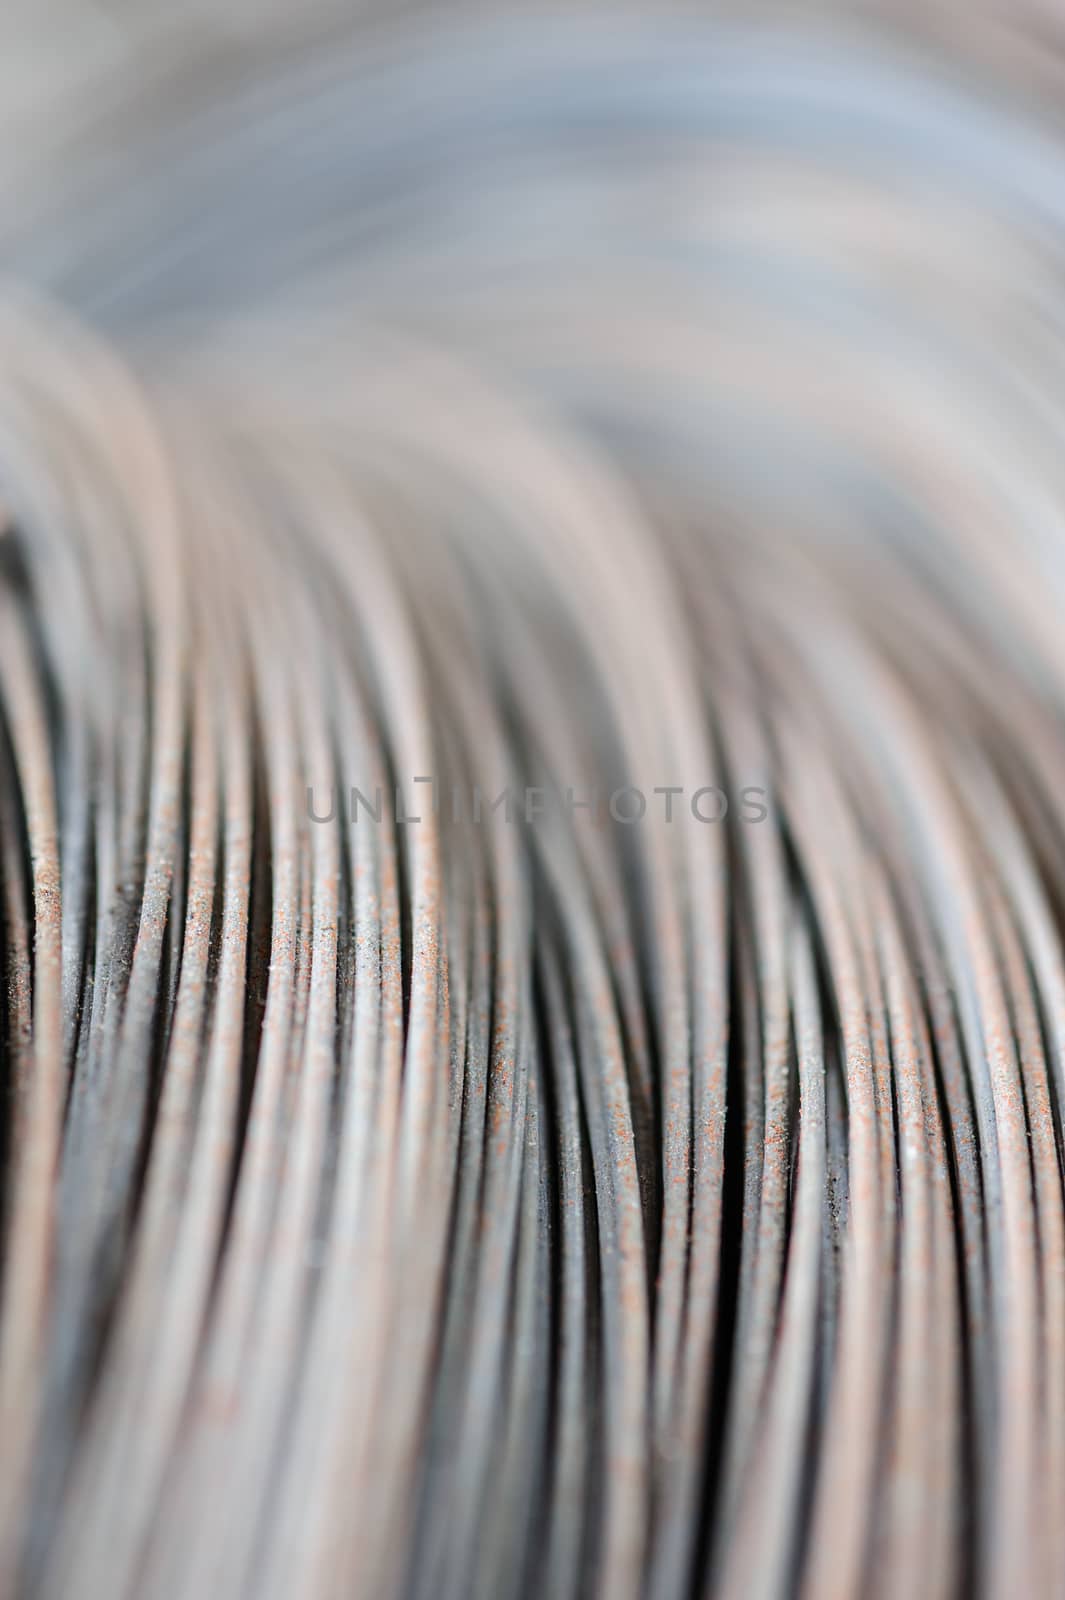 hank of metal wire background by starush